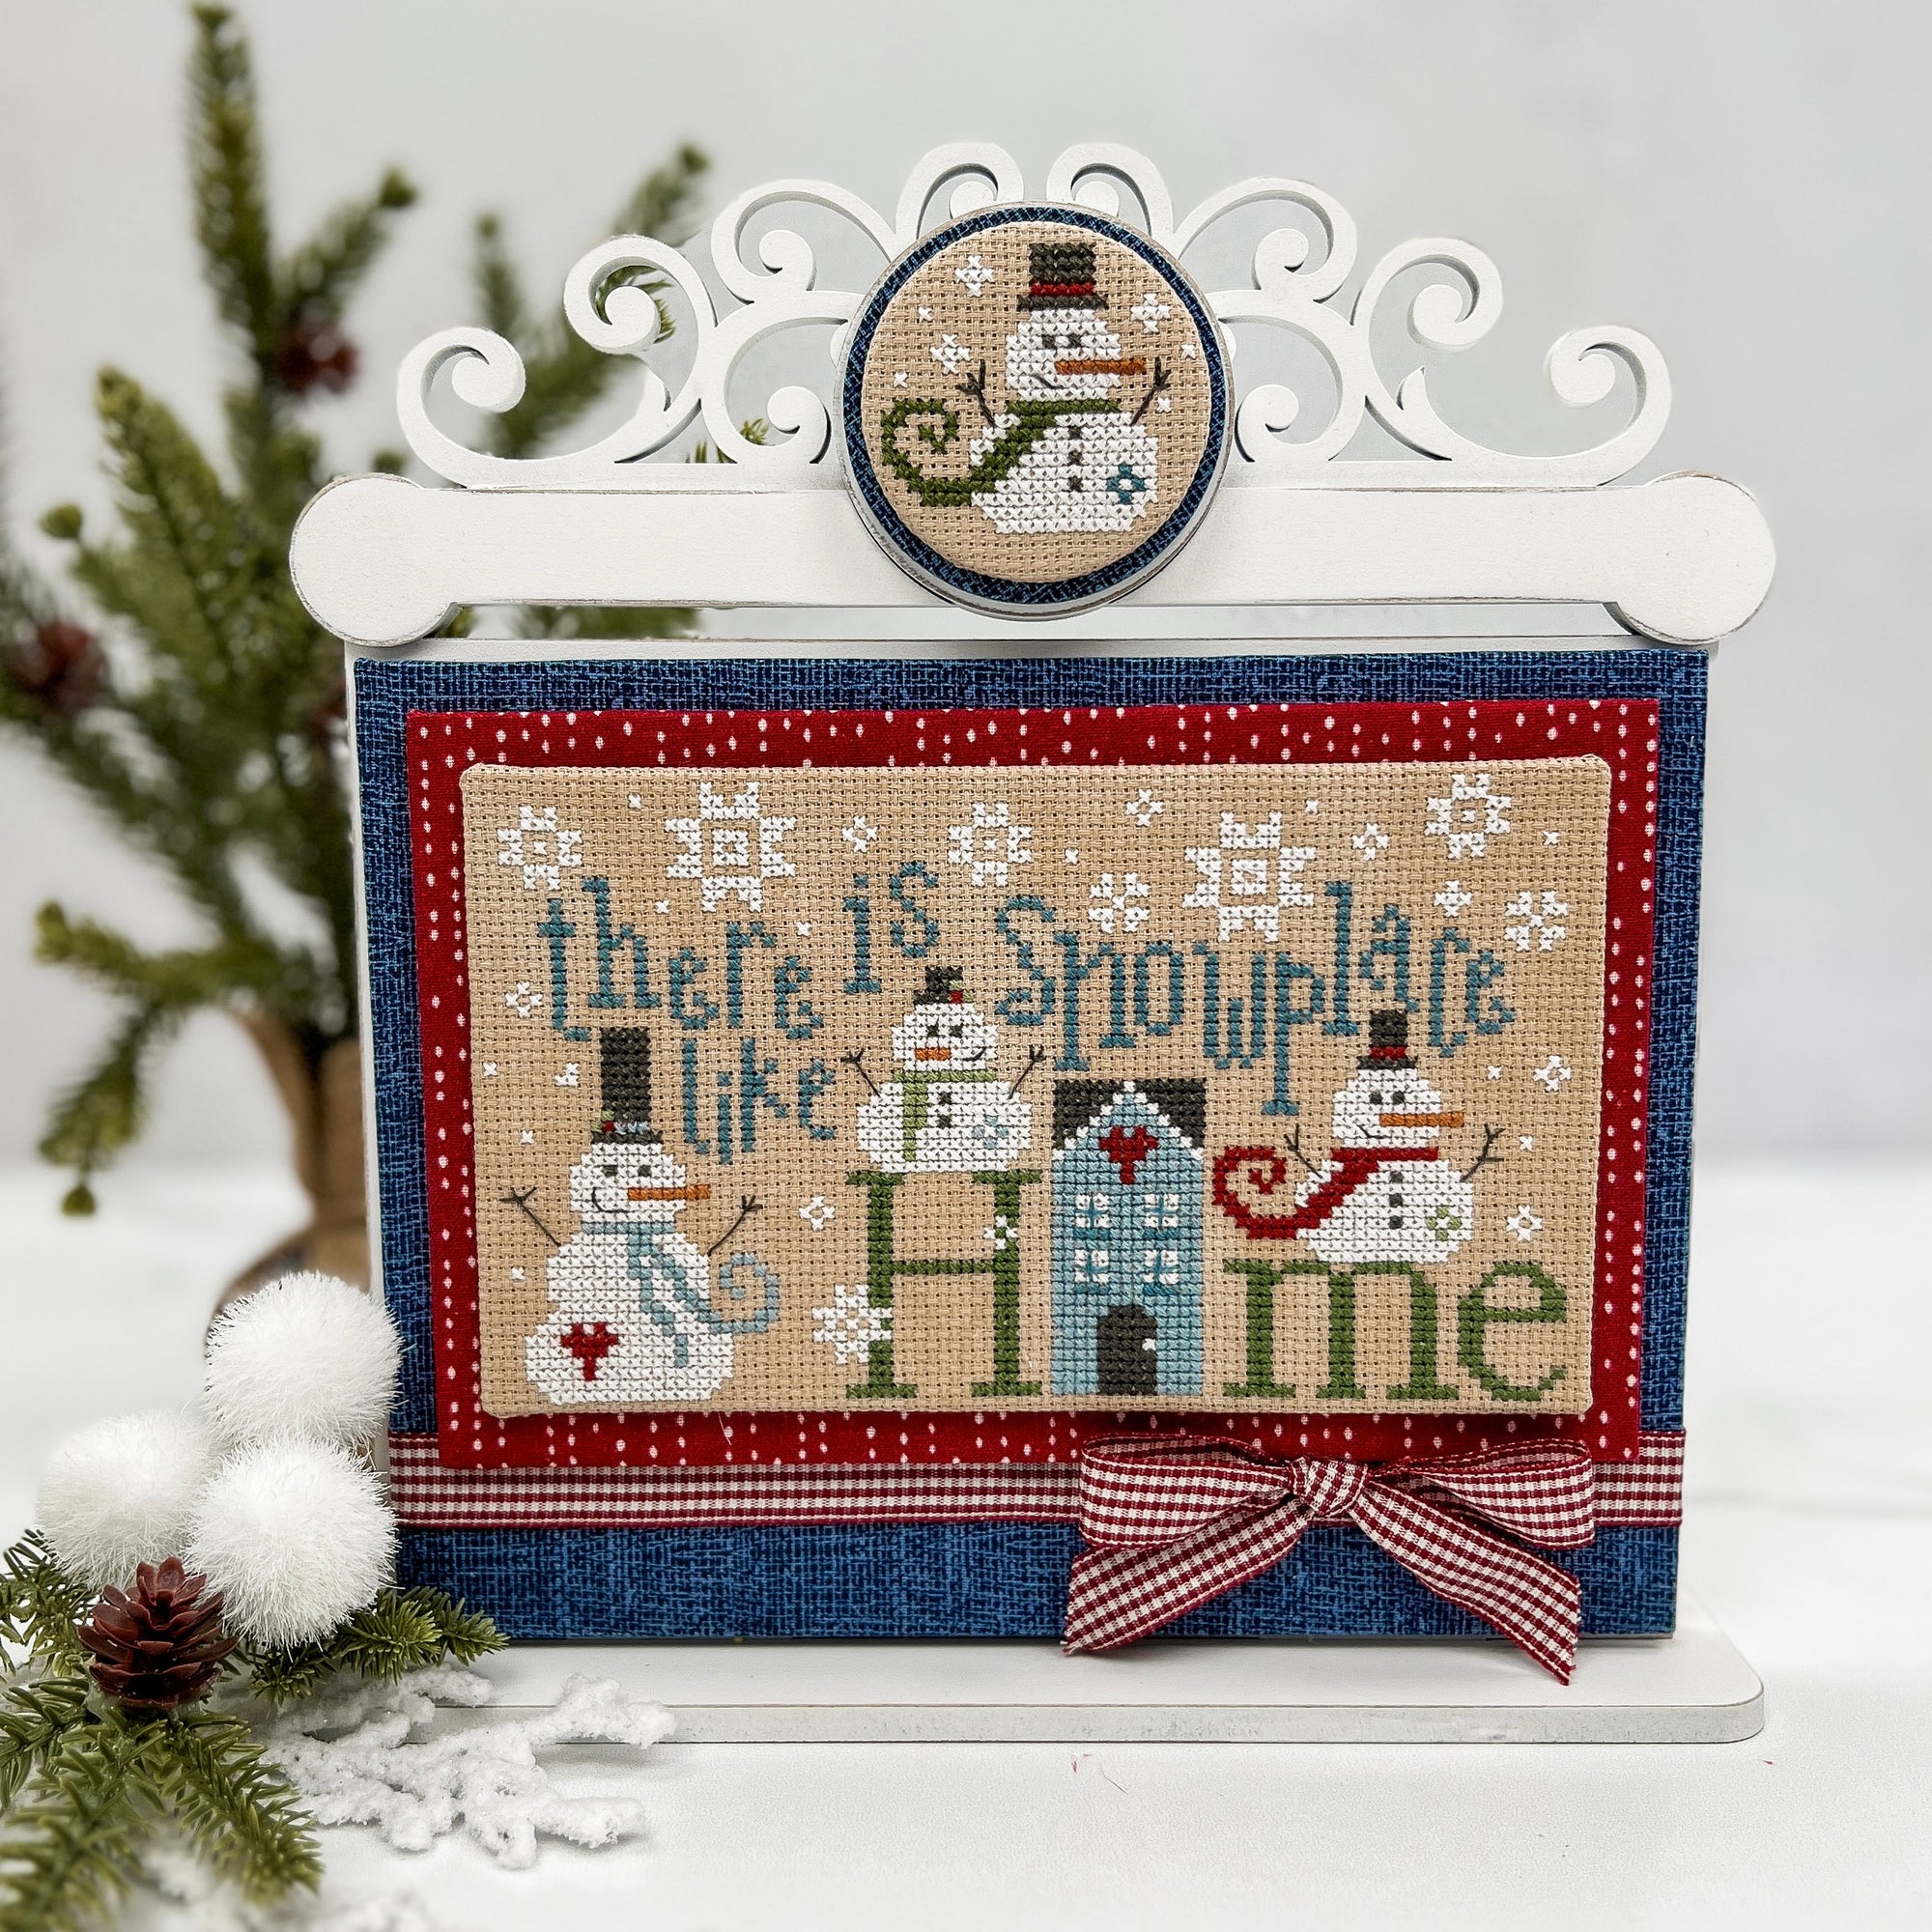 Cross stitch display with a scroll work top with a finished cross stitch Snowplace like home from Primrose Cottage